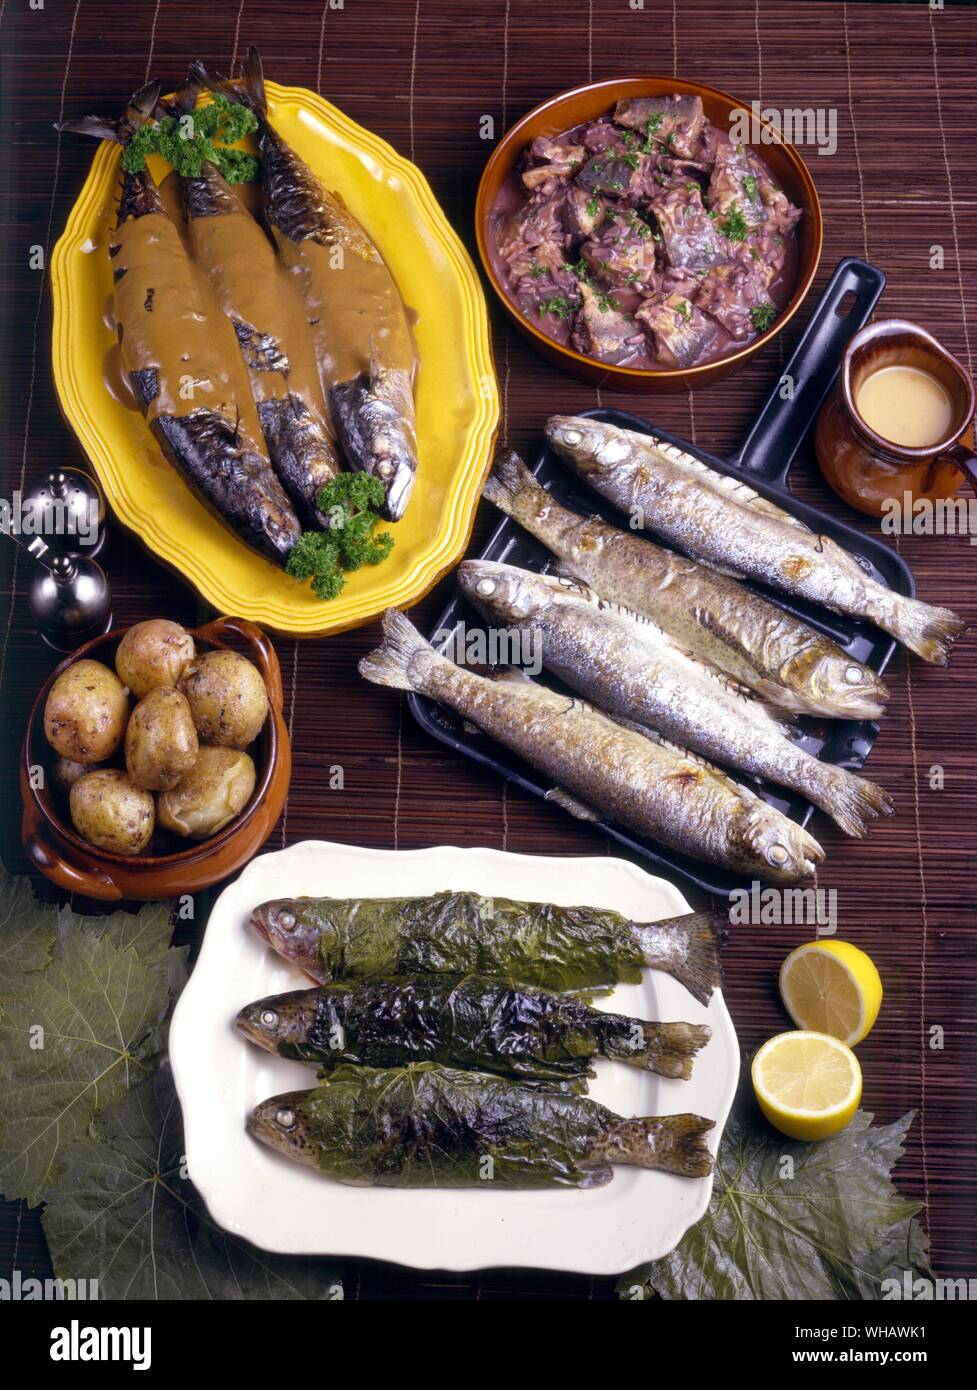 Harengs en matelote. Herrings in red wine sauce. . Maqueraux a l'oleronnaise. Grilled mackerel with mustard and spices. . Truites grillees sauce piquante. Grilled trout with sauce piquante . . Truites a la Bresle. Trout cooked in vine leaves Stock Photo